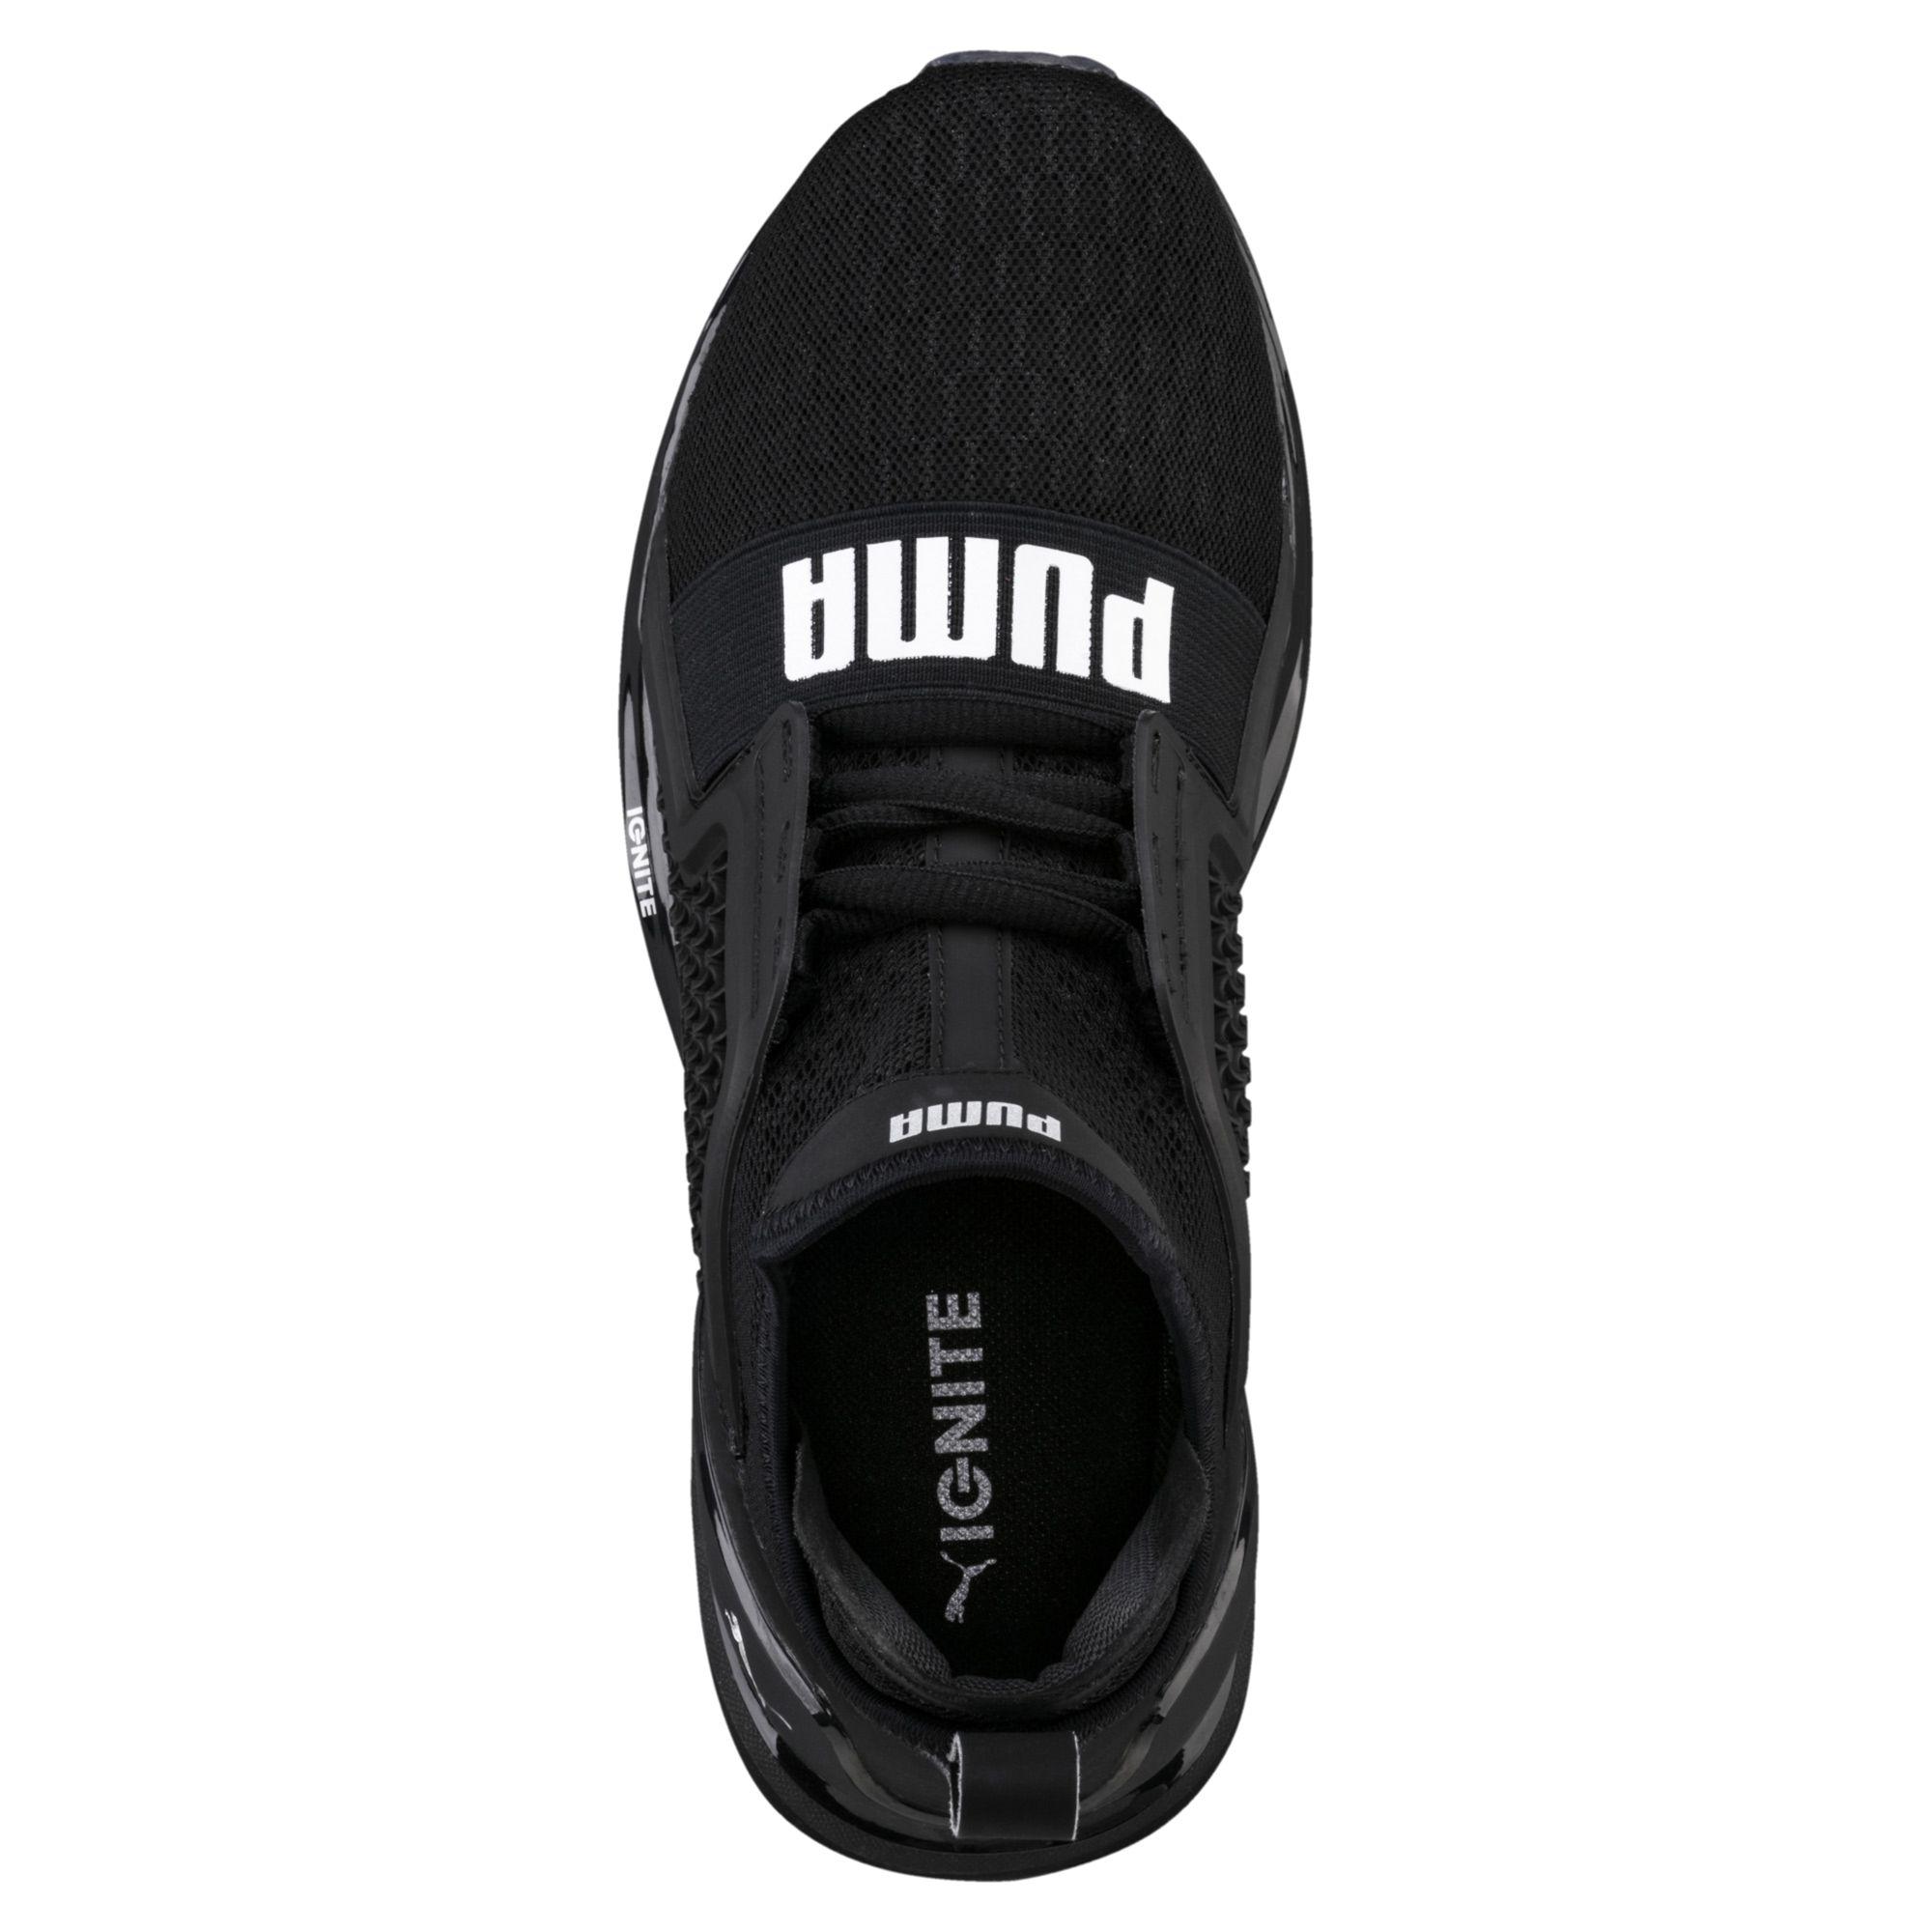 PUMA Rubber Ignite Limitless Women's Training Shoes in Black - Lyst